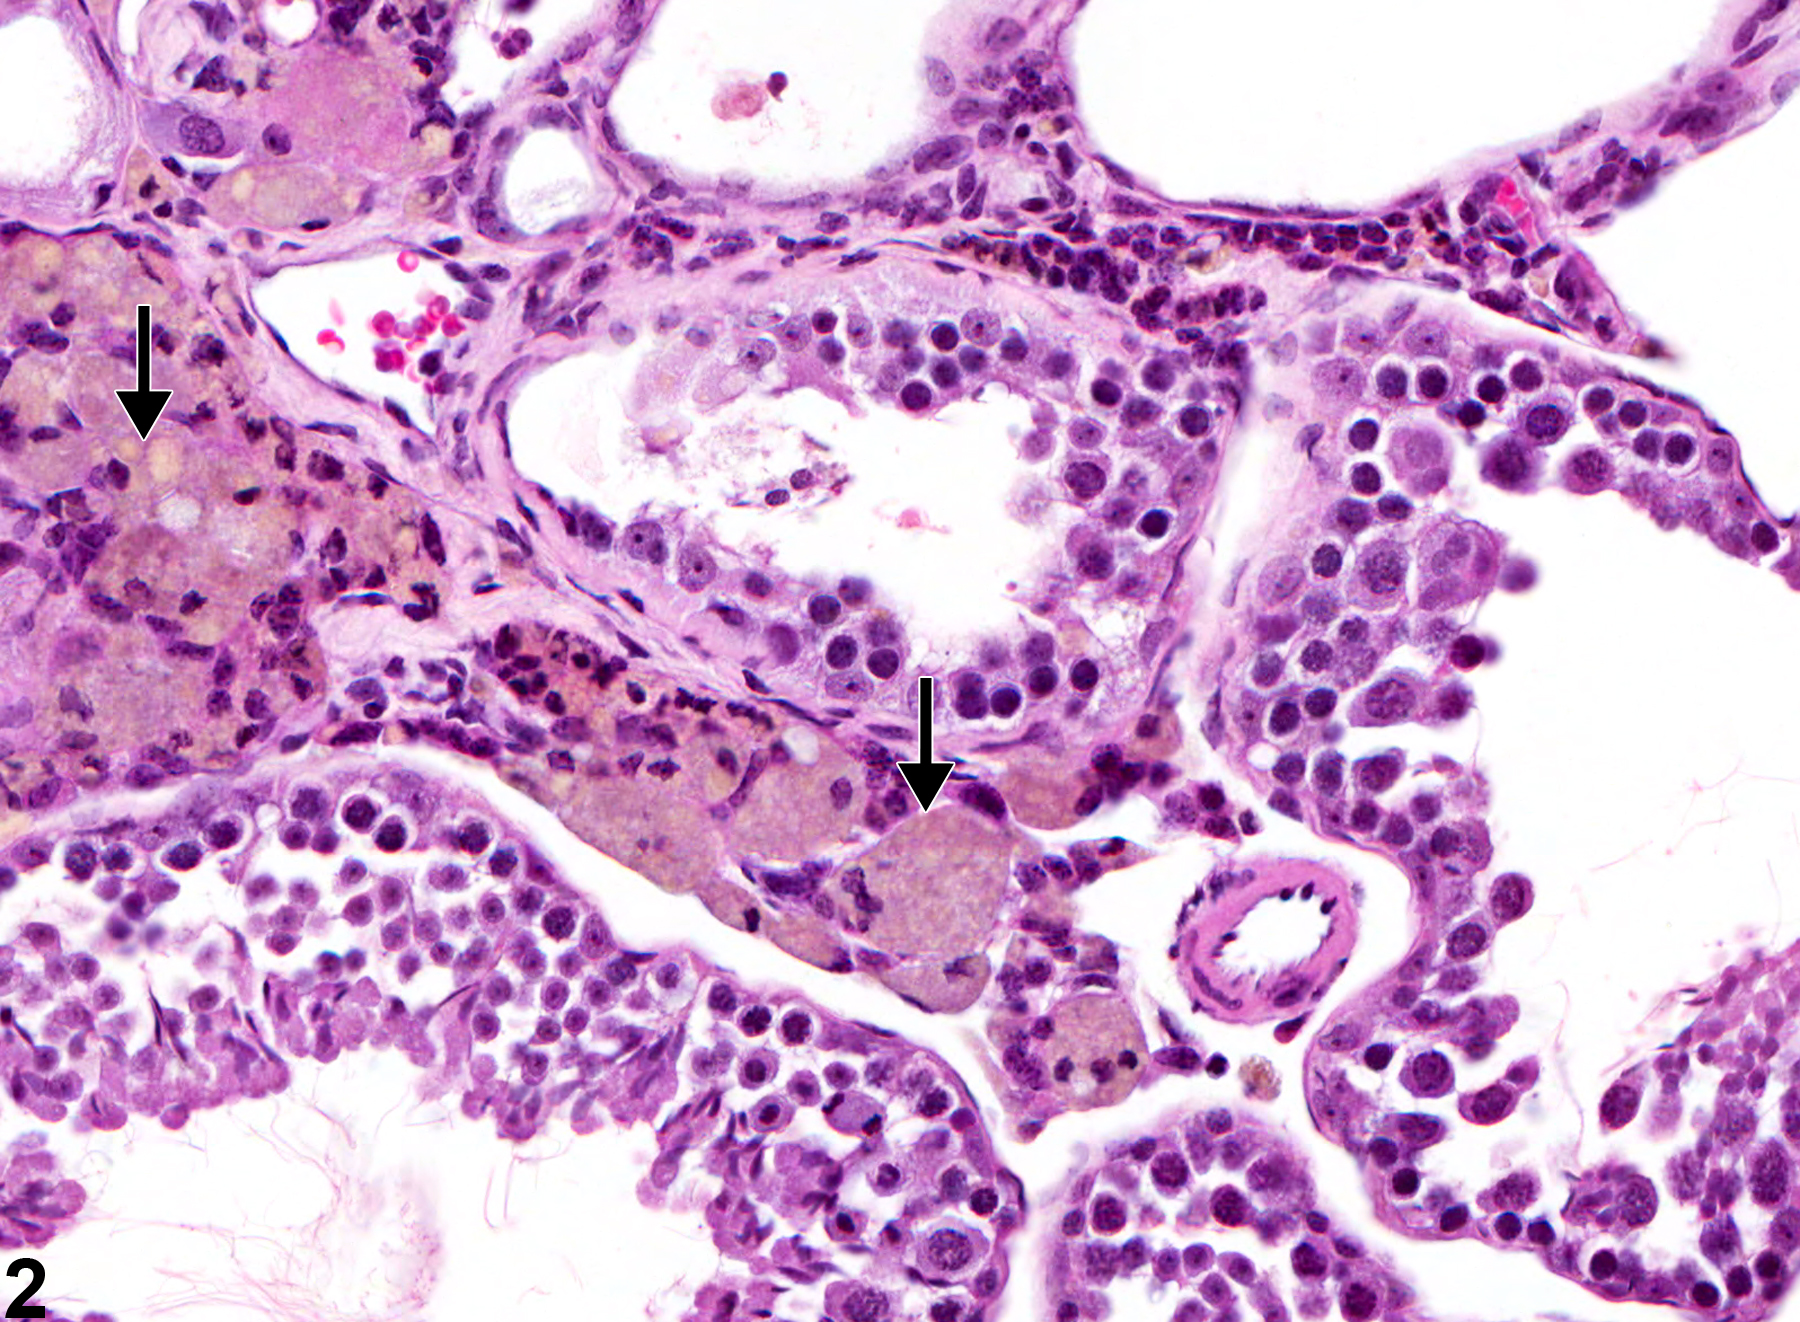 Image of pigment in the testis from a male B6C3F1 mouse in a chronic study